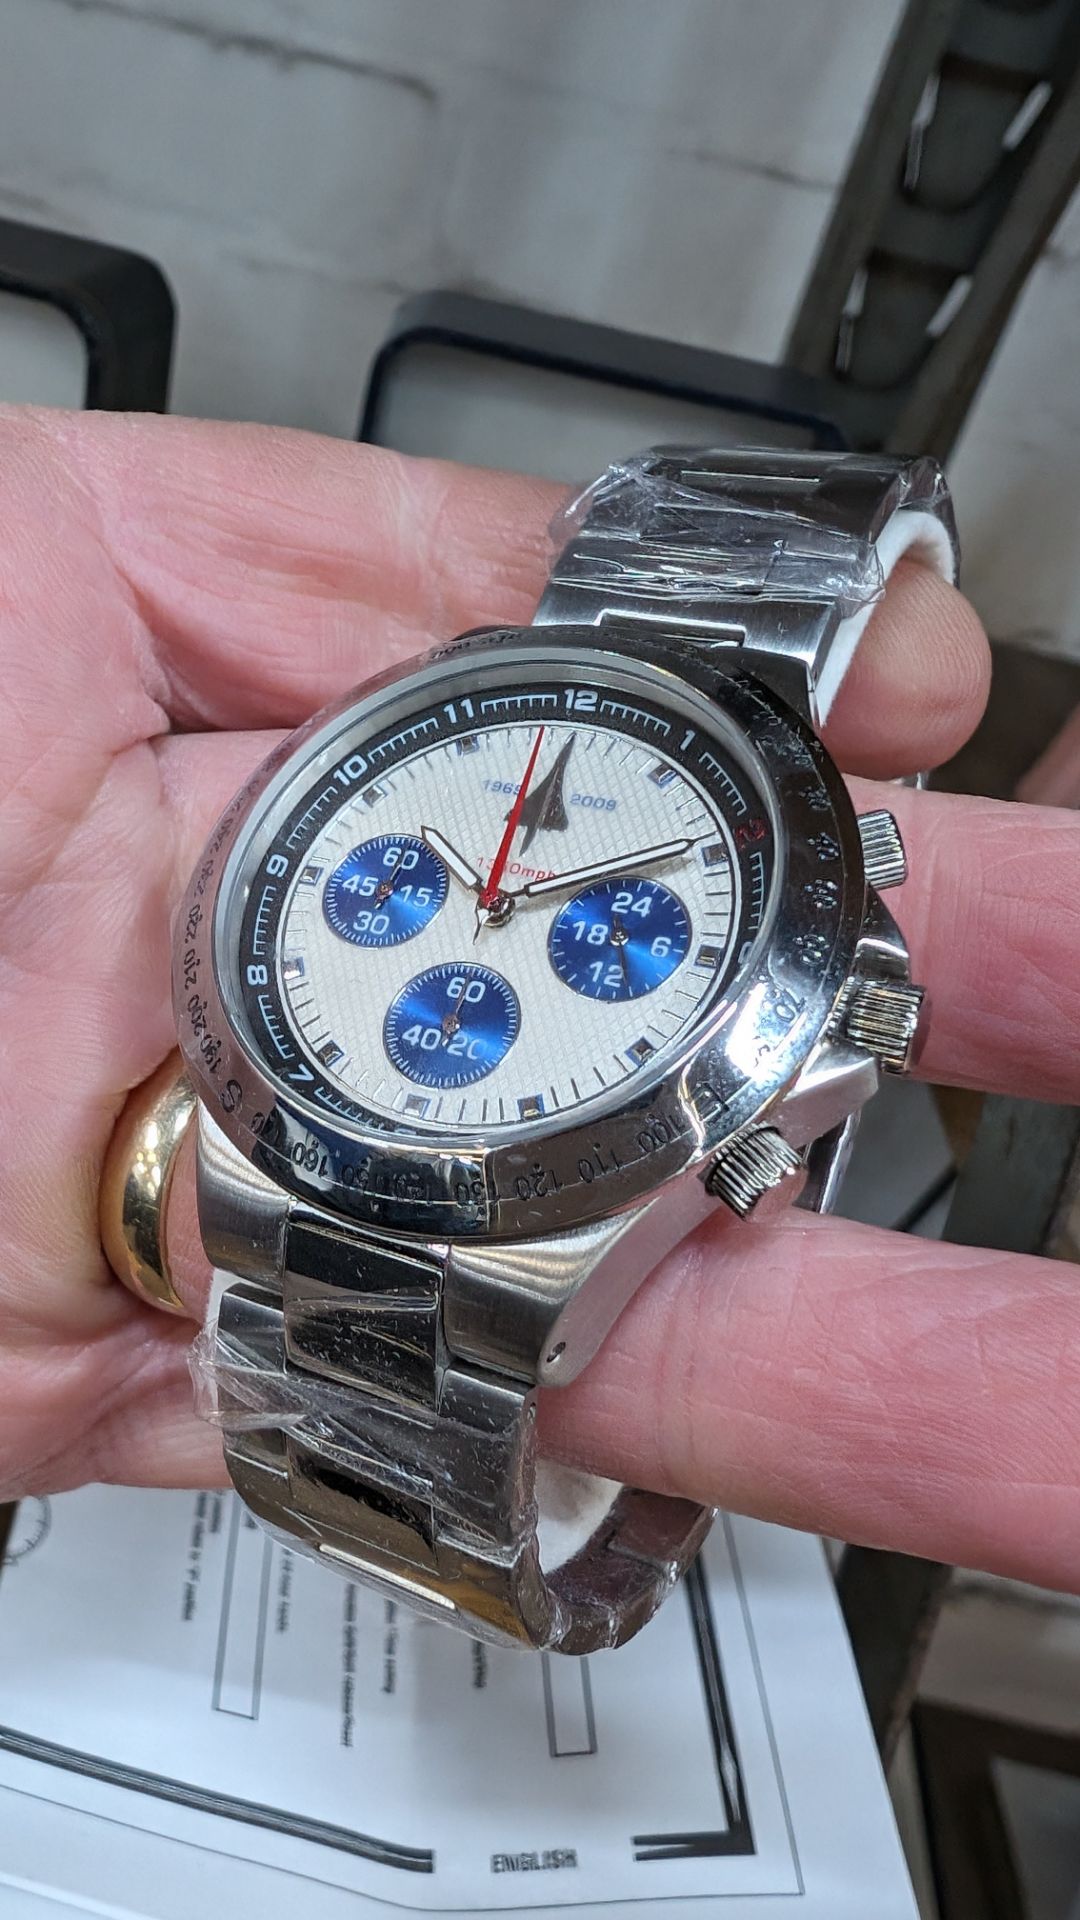 40th anniversary supersonic flight chronograph watch - Image 6 of 11